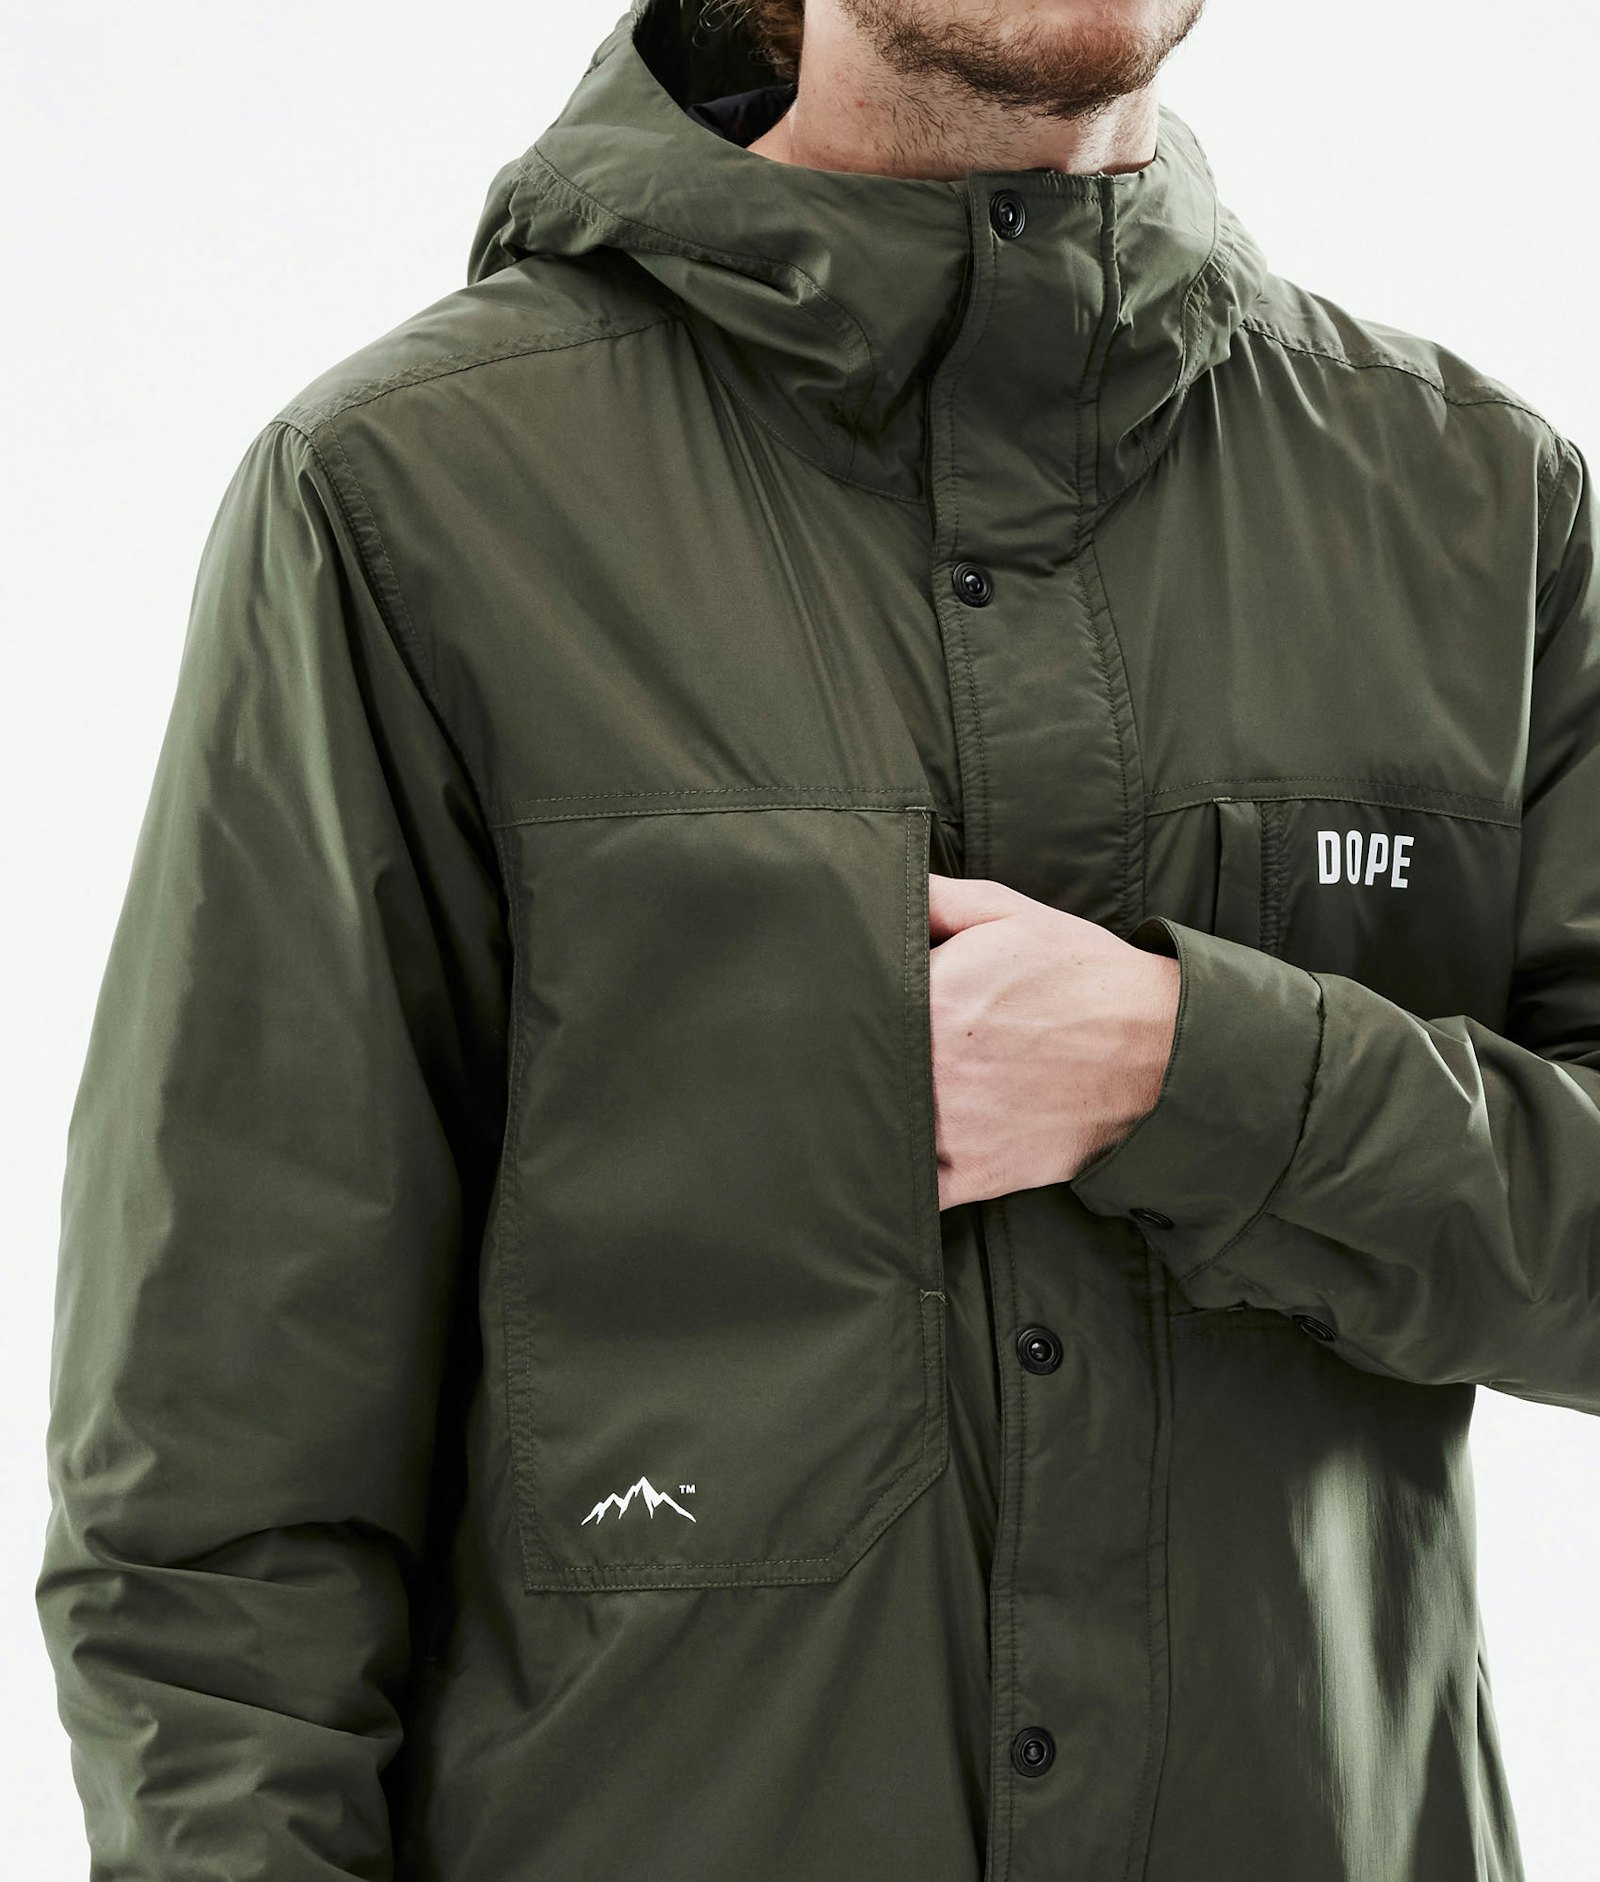 Insulated Veste - Couche intermédiaire Homme Olive Green